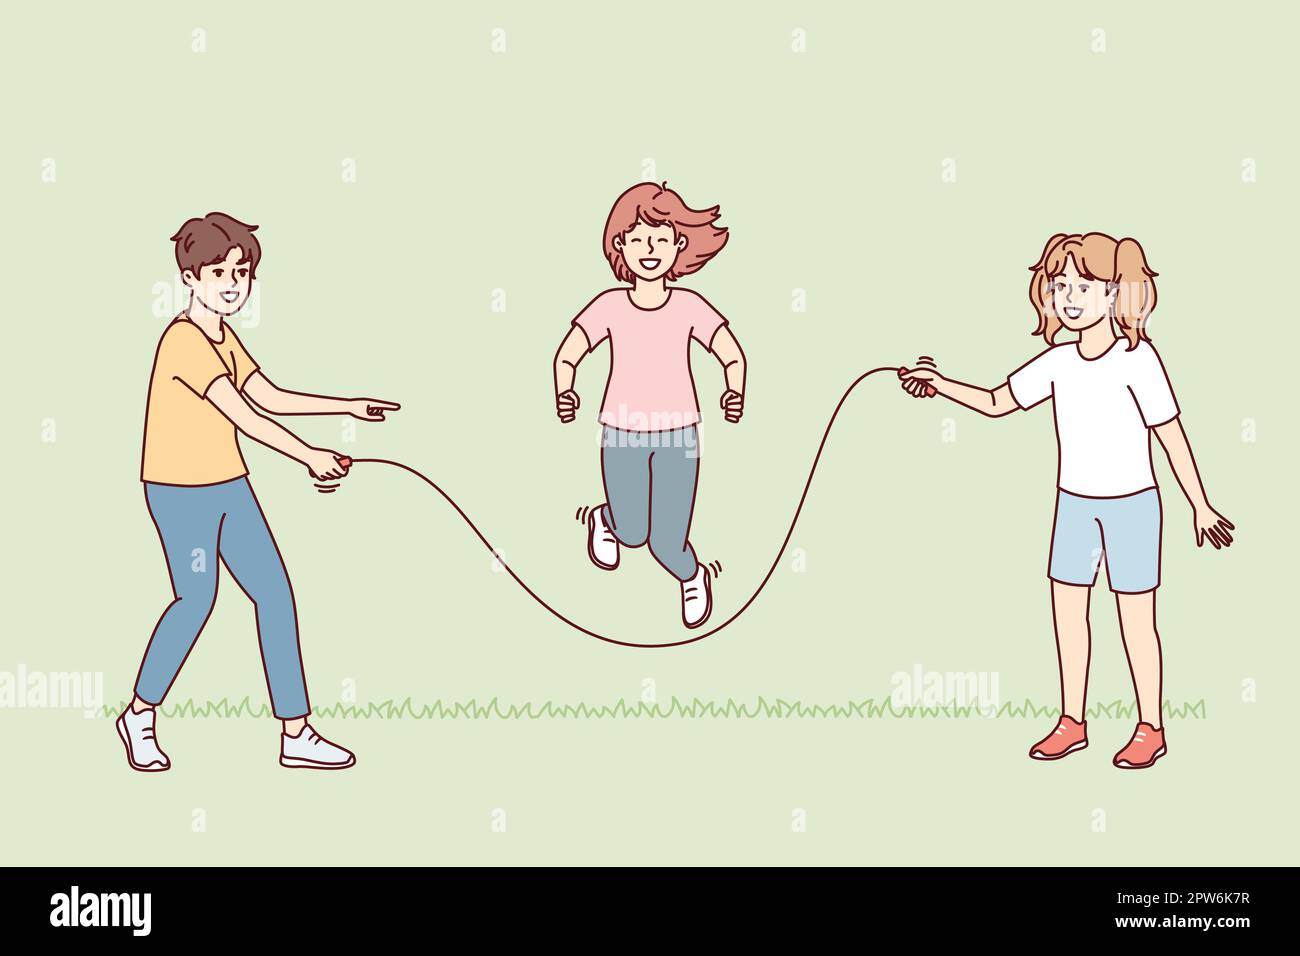 Children stand on lawn jumping rope relaxing during summer vacation or day off. Vector image Stock Vector